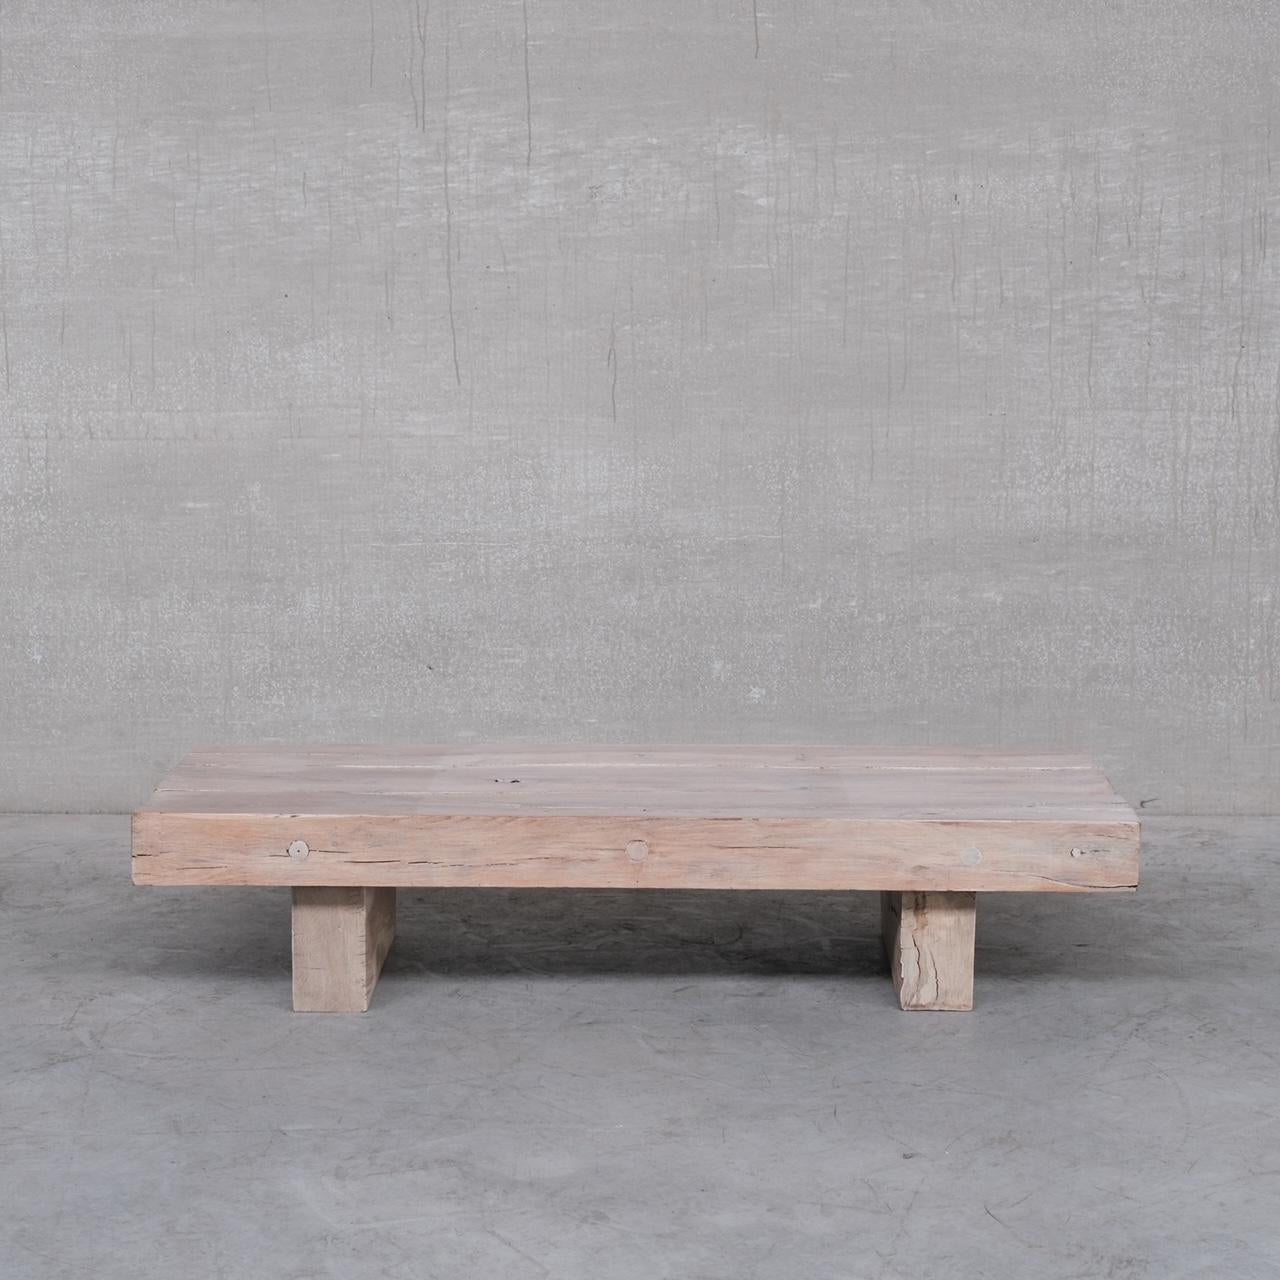 A brutalist sleeper style coffee table. 

Belgium, c1970s.
 
White washed at some point. 

Good condition. 

Heavy and good quality chunky wood. A twist on the darker versions. 

Location: Belgium Gallery.

Dimensions: 62 D x 150 W x 33